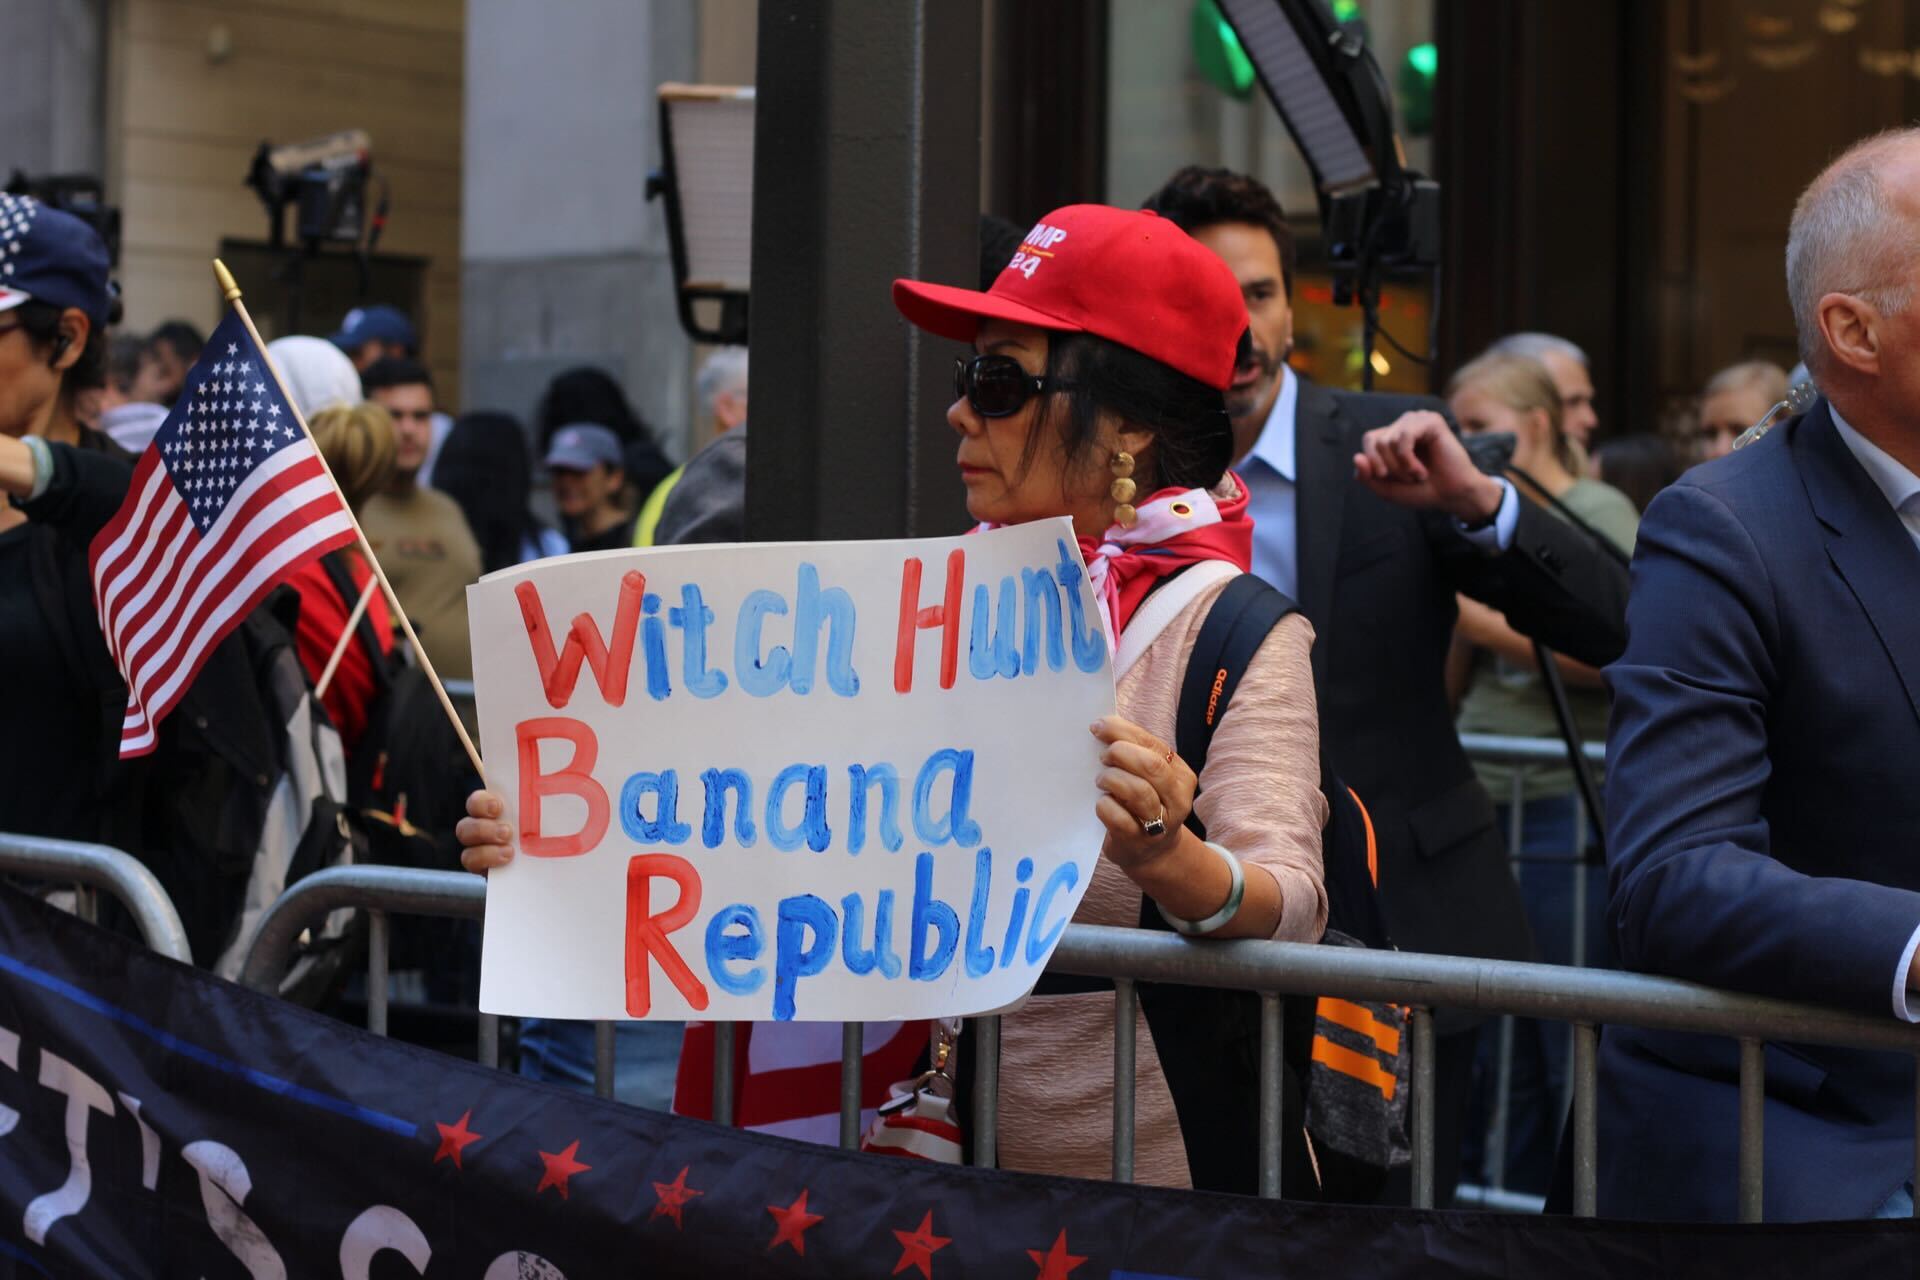 A Trump supporter holds a sign saying “Witch Hunt Banana Republic” outside of Trump Tower on 31 May